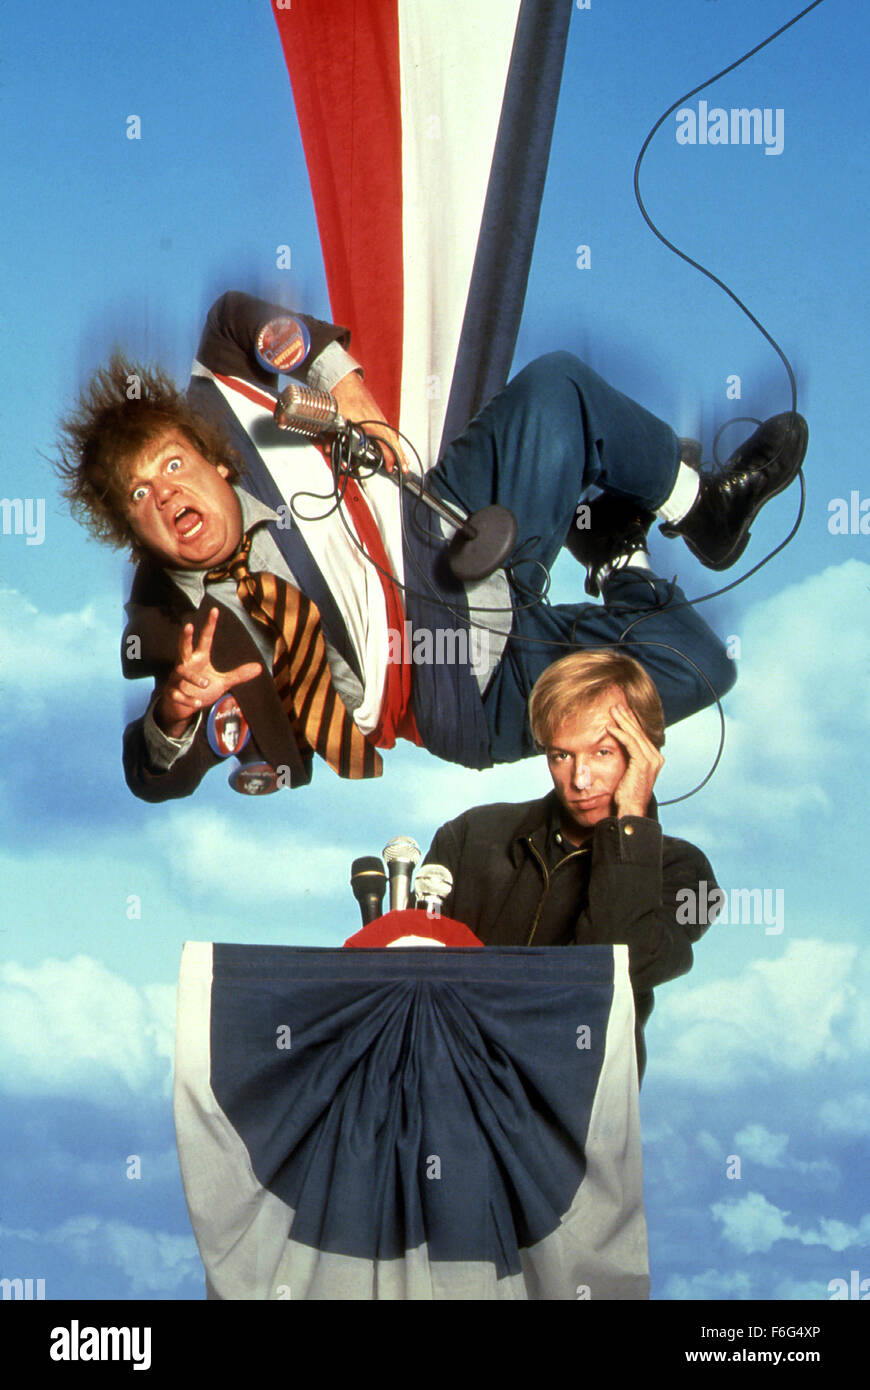 Feb 02, 1996; Hollywood, CA, USA; Key poster art featuring CHRIS FARLEY (top) as Mike Donnelly and DAVID SPADE as Steve Dodds in the comedy ''Black Sheep'' directed by Penelope Spheeris. Stock Photo